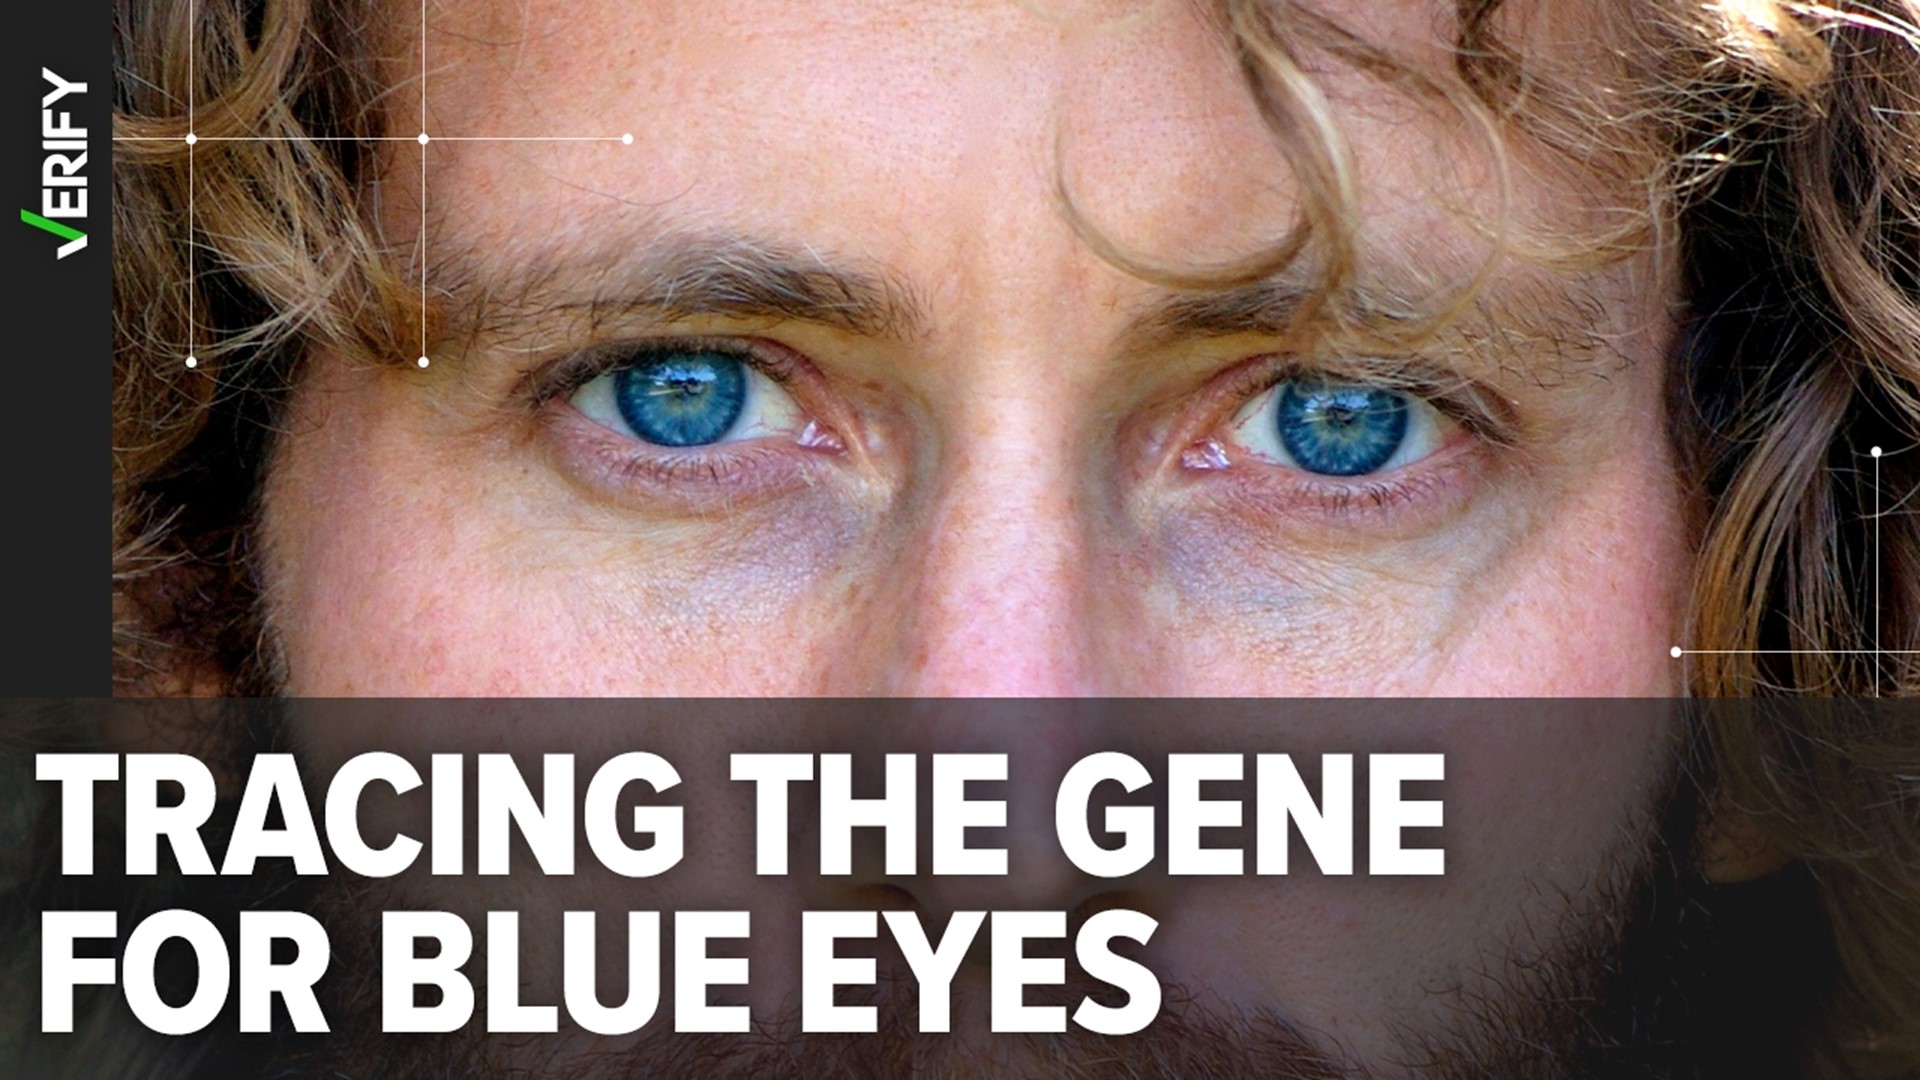 All blue-eyed people have a single genetic mutation that first occurred between 6,000 and 10,000 years ago, scientists say.